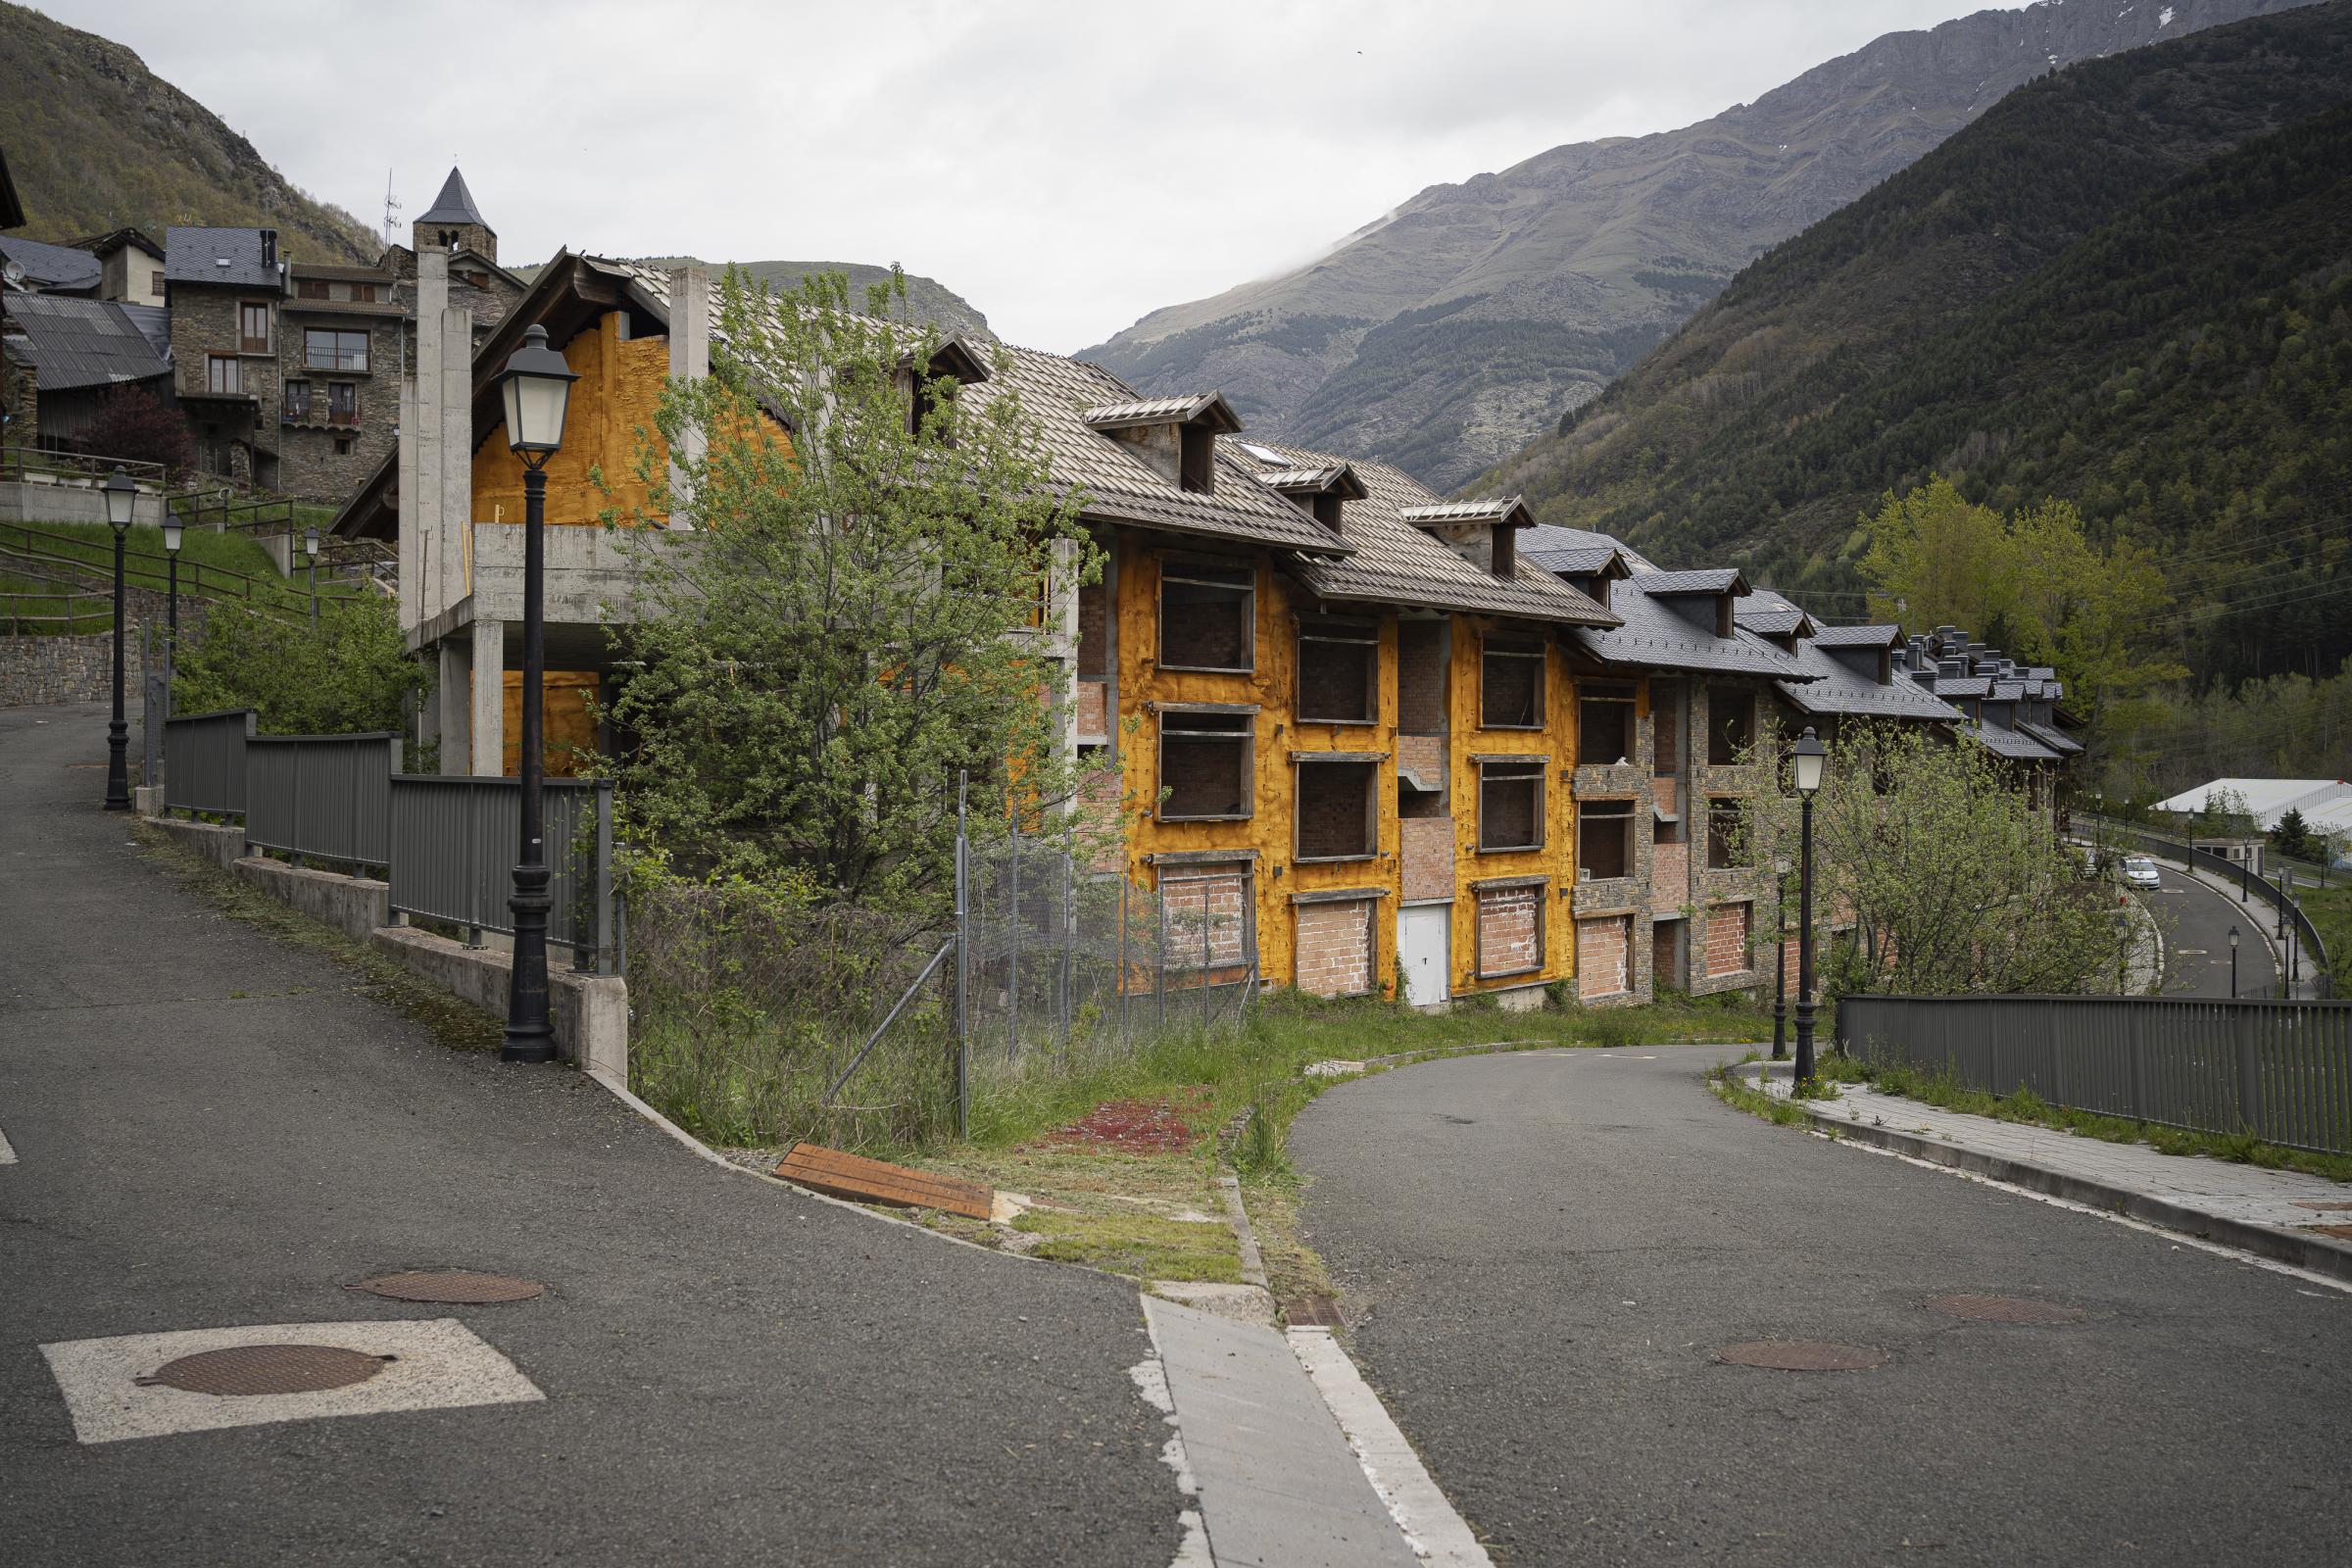  Half-built abandoned flats in the first row of houses in the village of Espui. The village,...